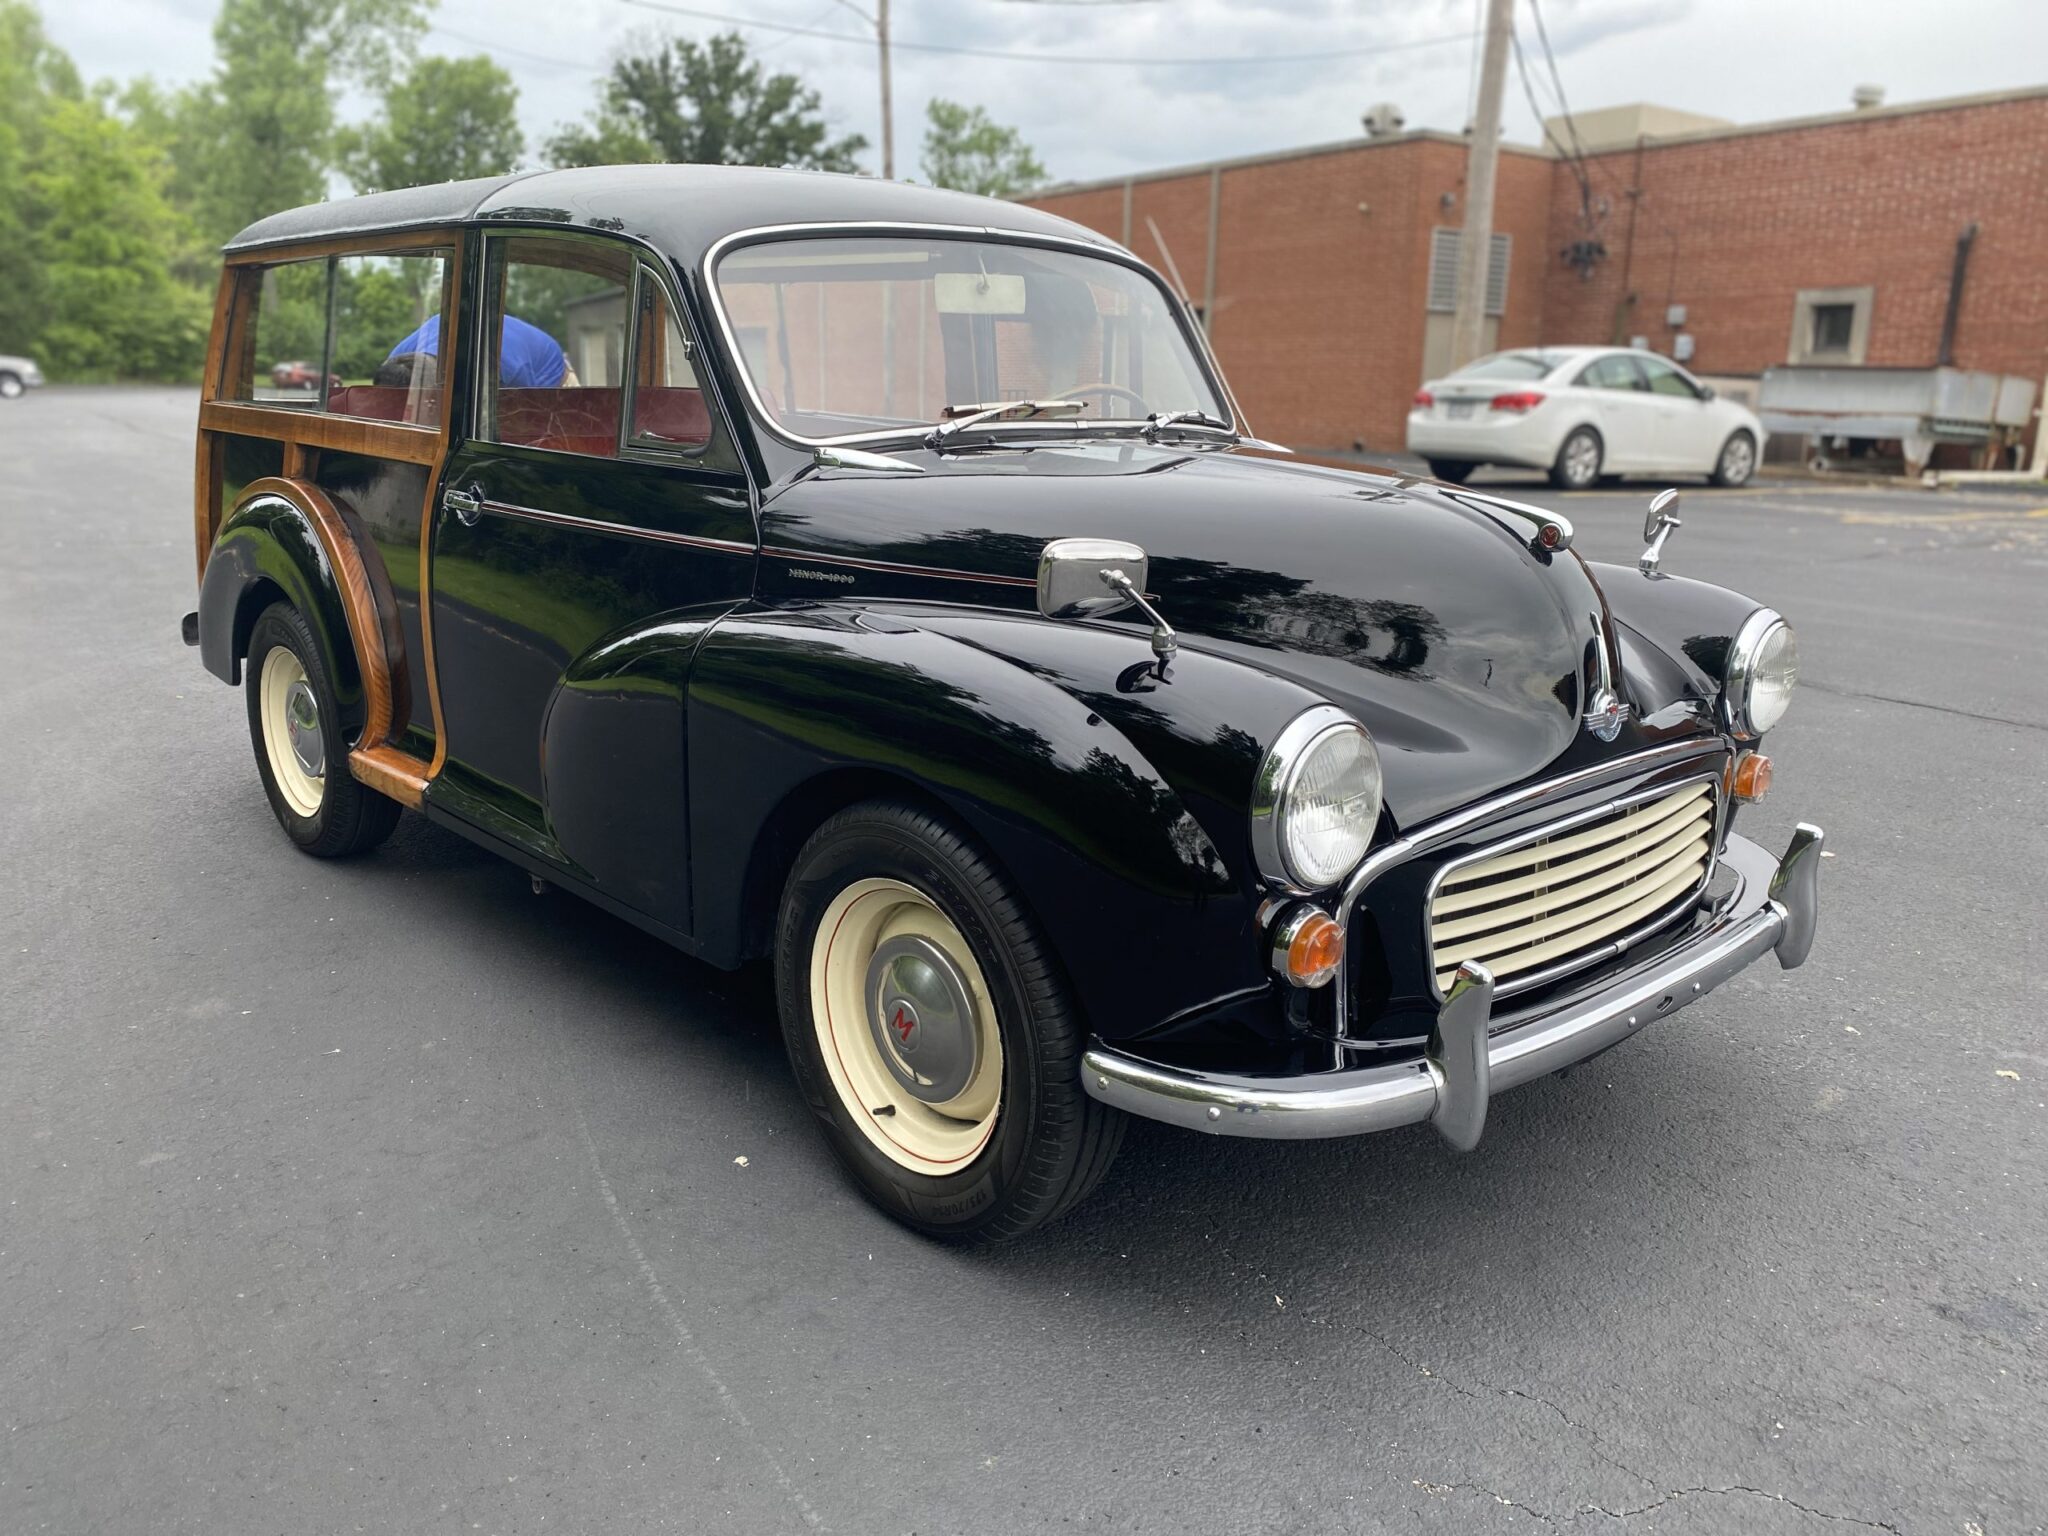 Pre-purchase Inspection Of A 1967 Morris Minor Traveler At The St Louis Car Museum